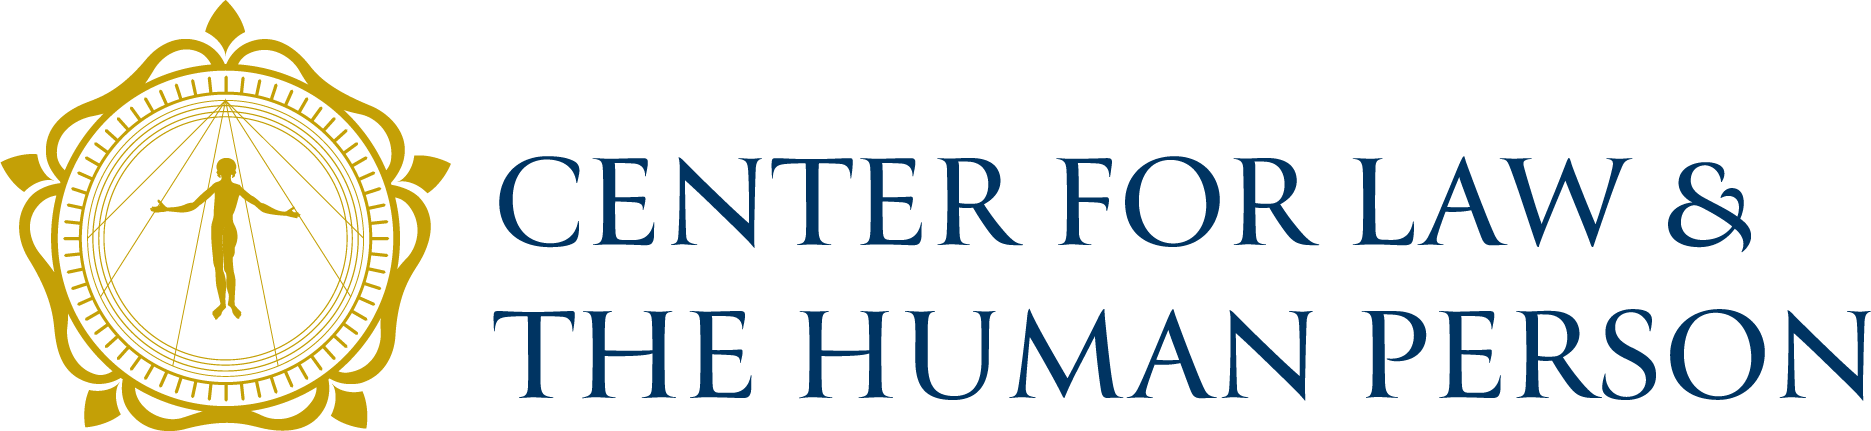 The Center for Law and the Human Person logo